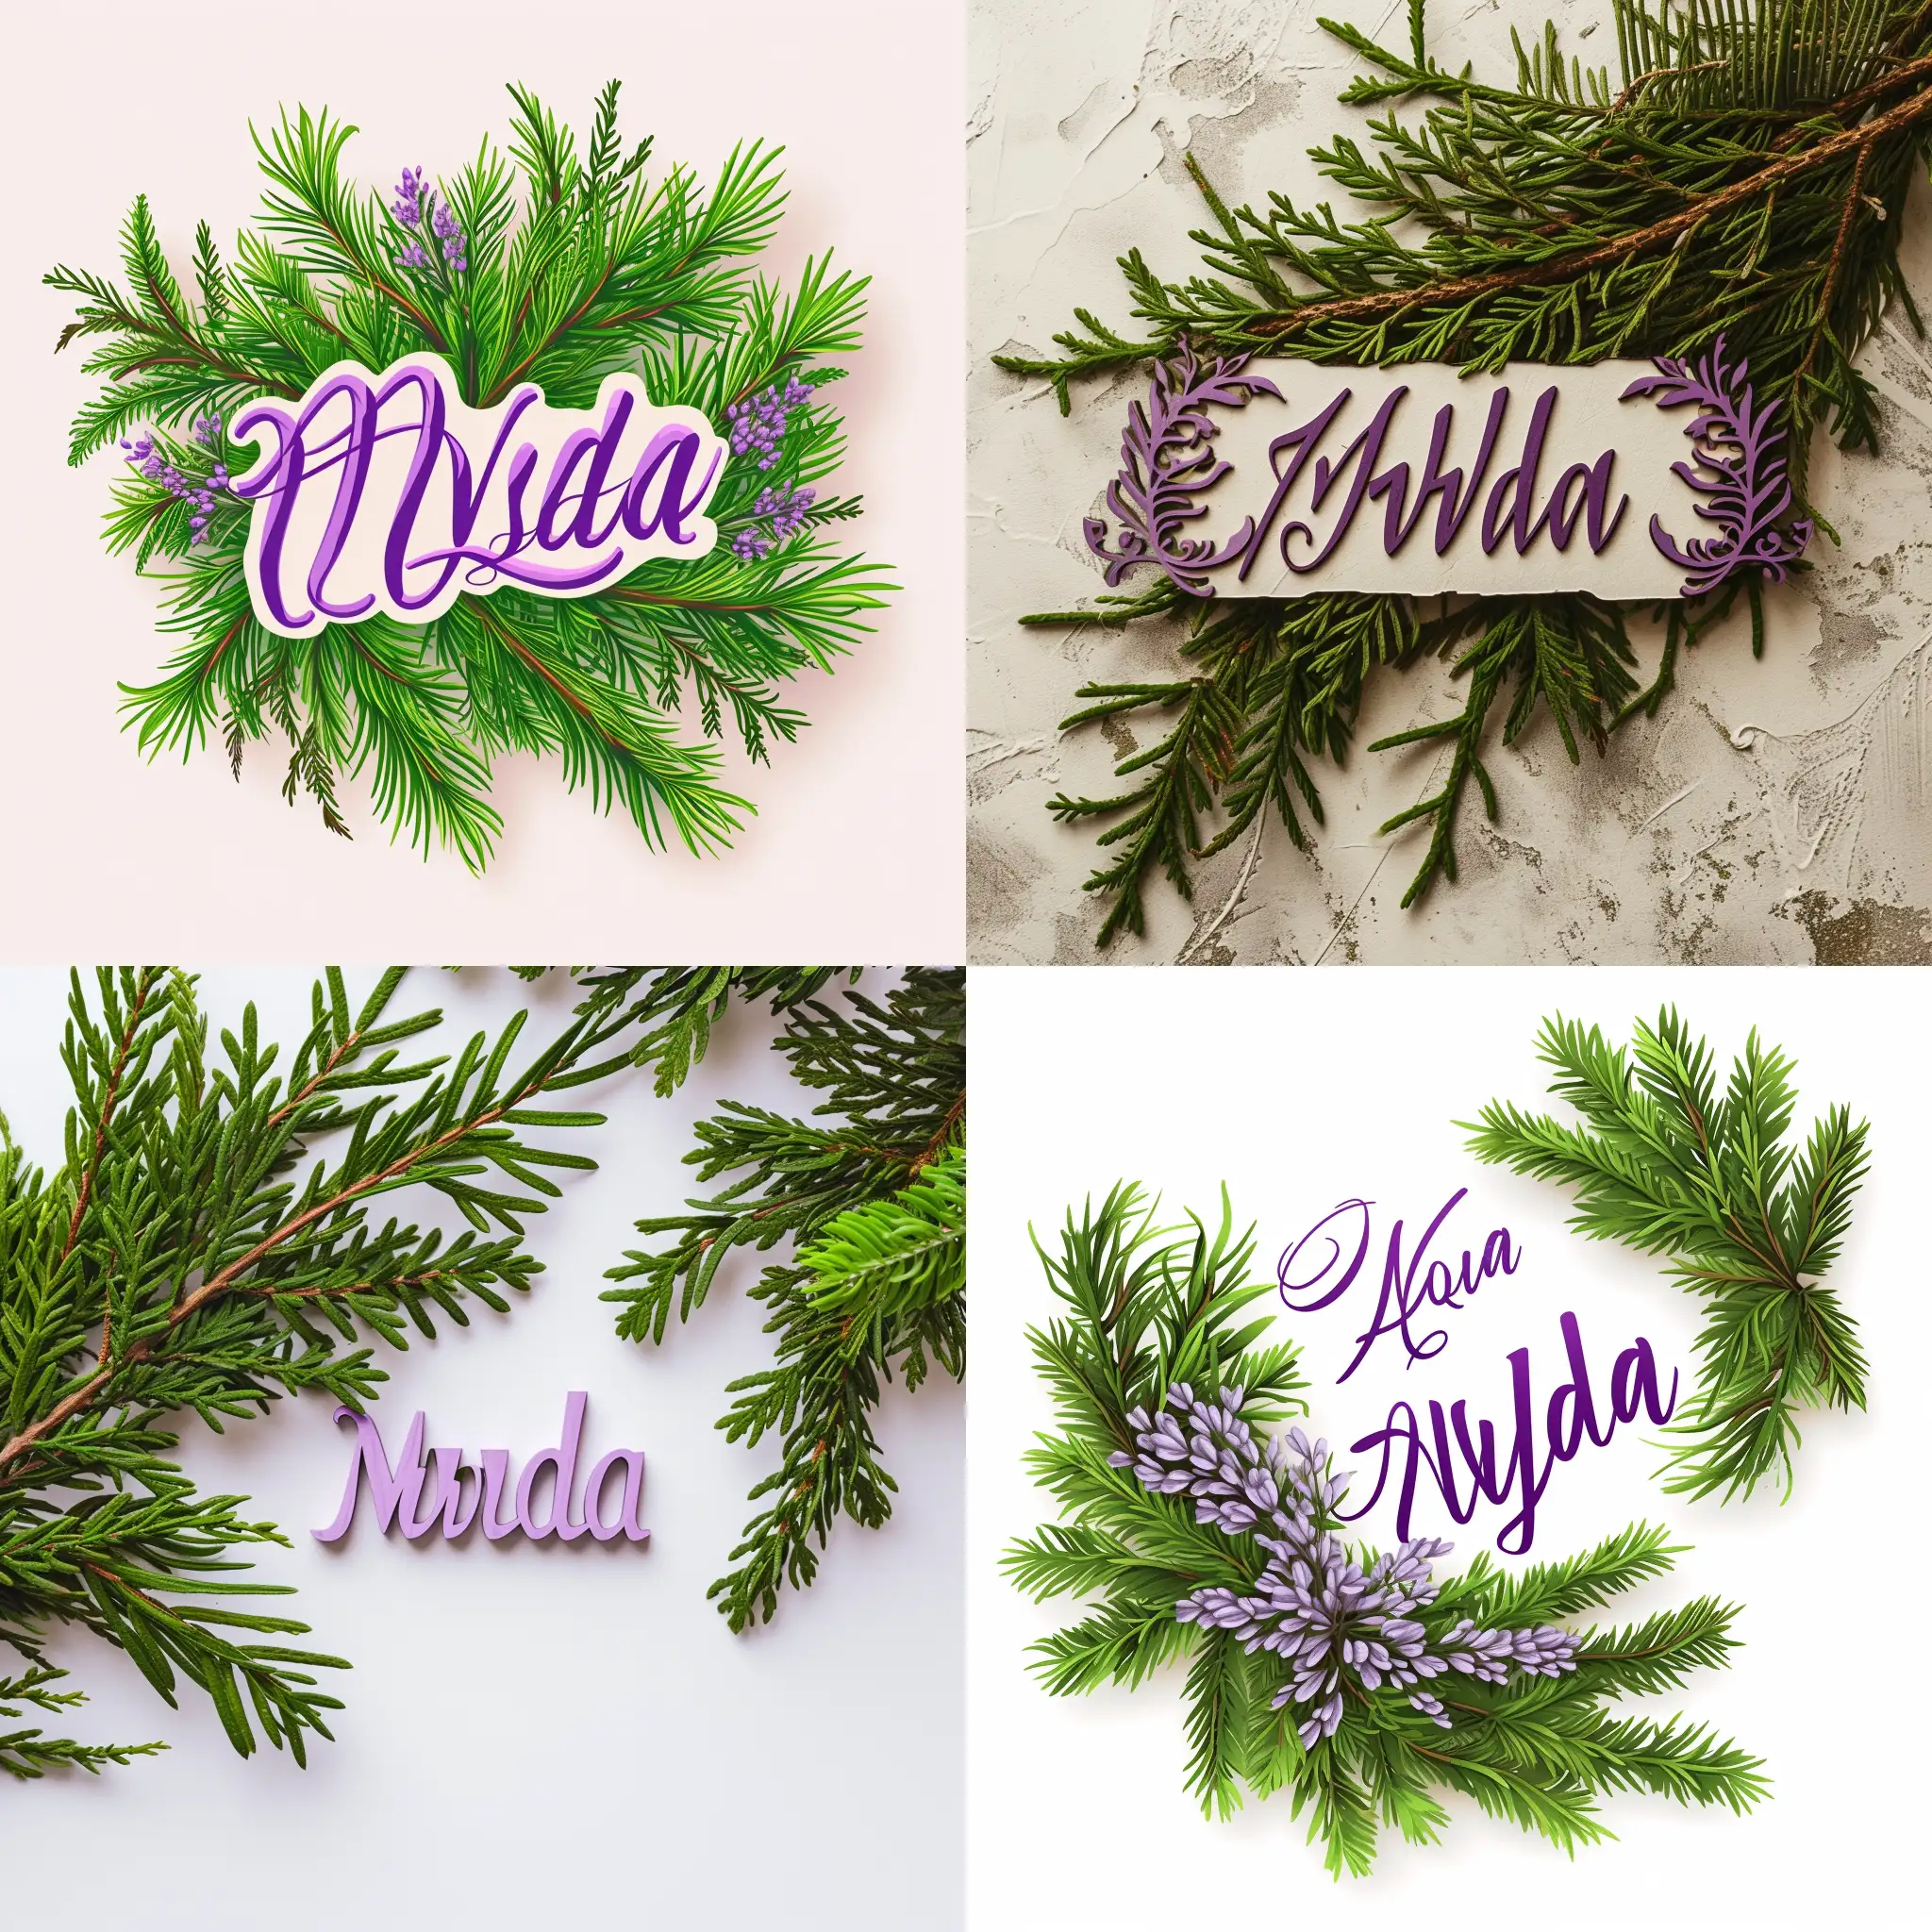 Elegant-Lilac-Calligraphic-Font-with-Vlada-Beside-Cedar-Branches